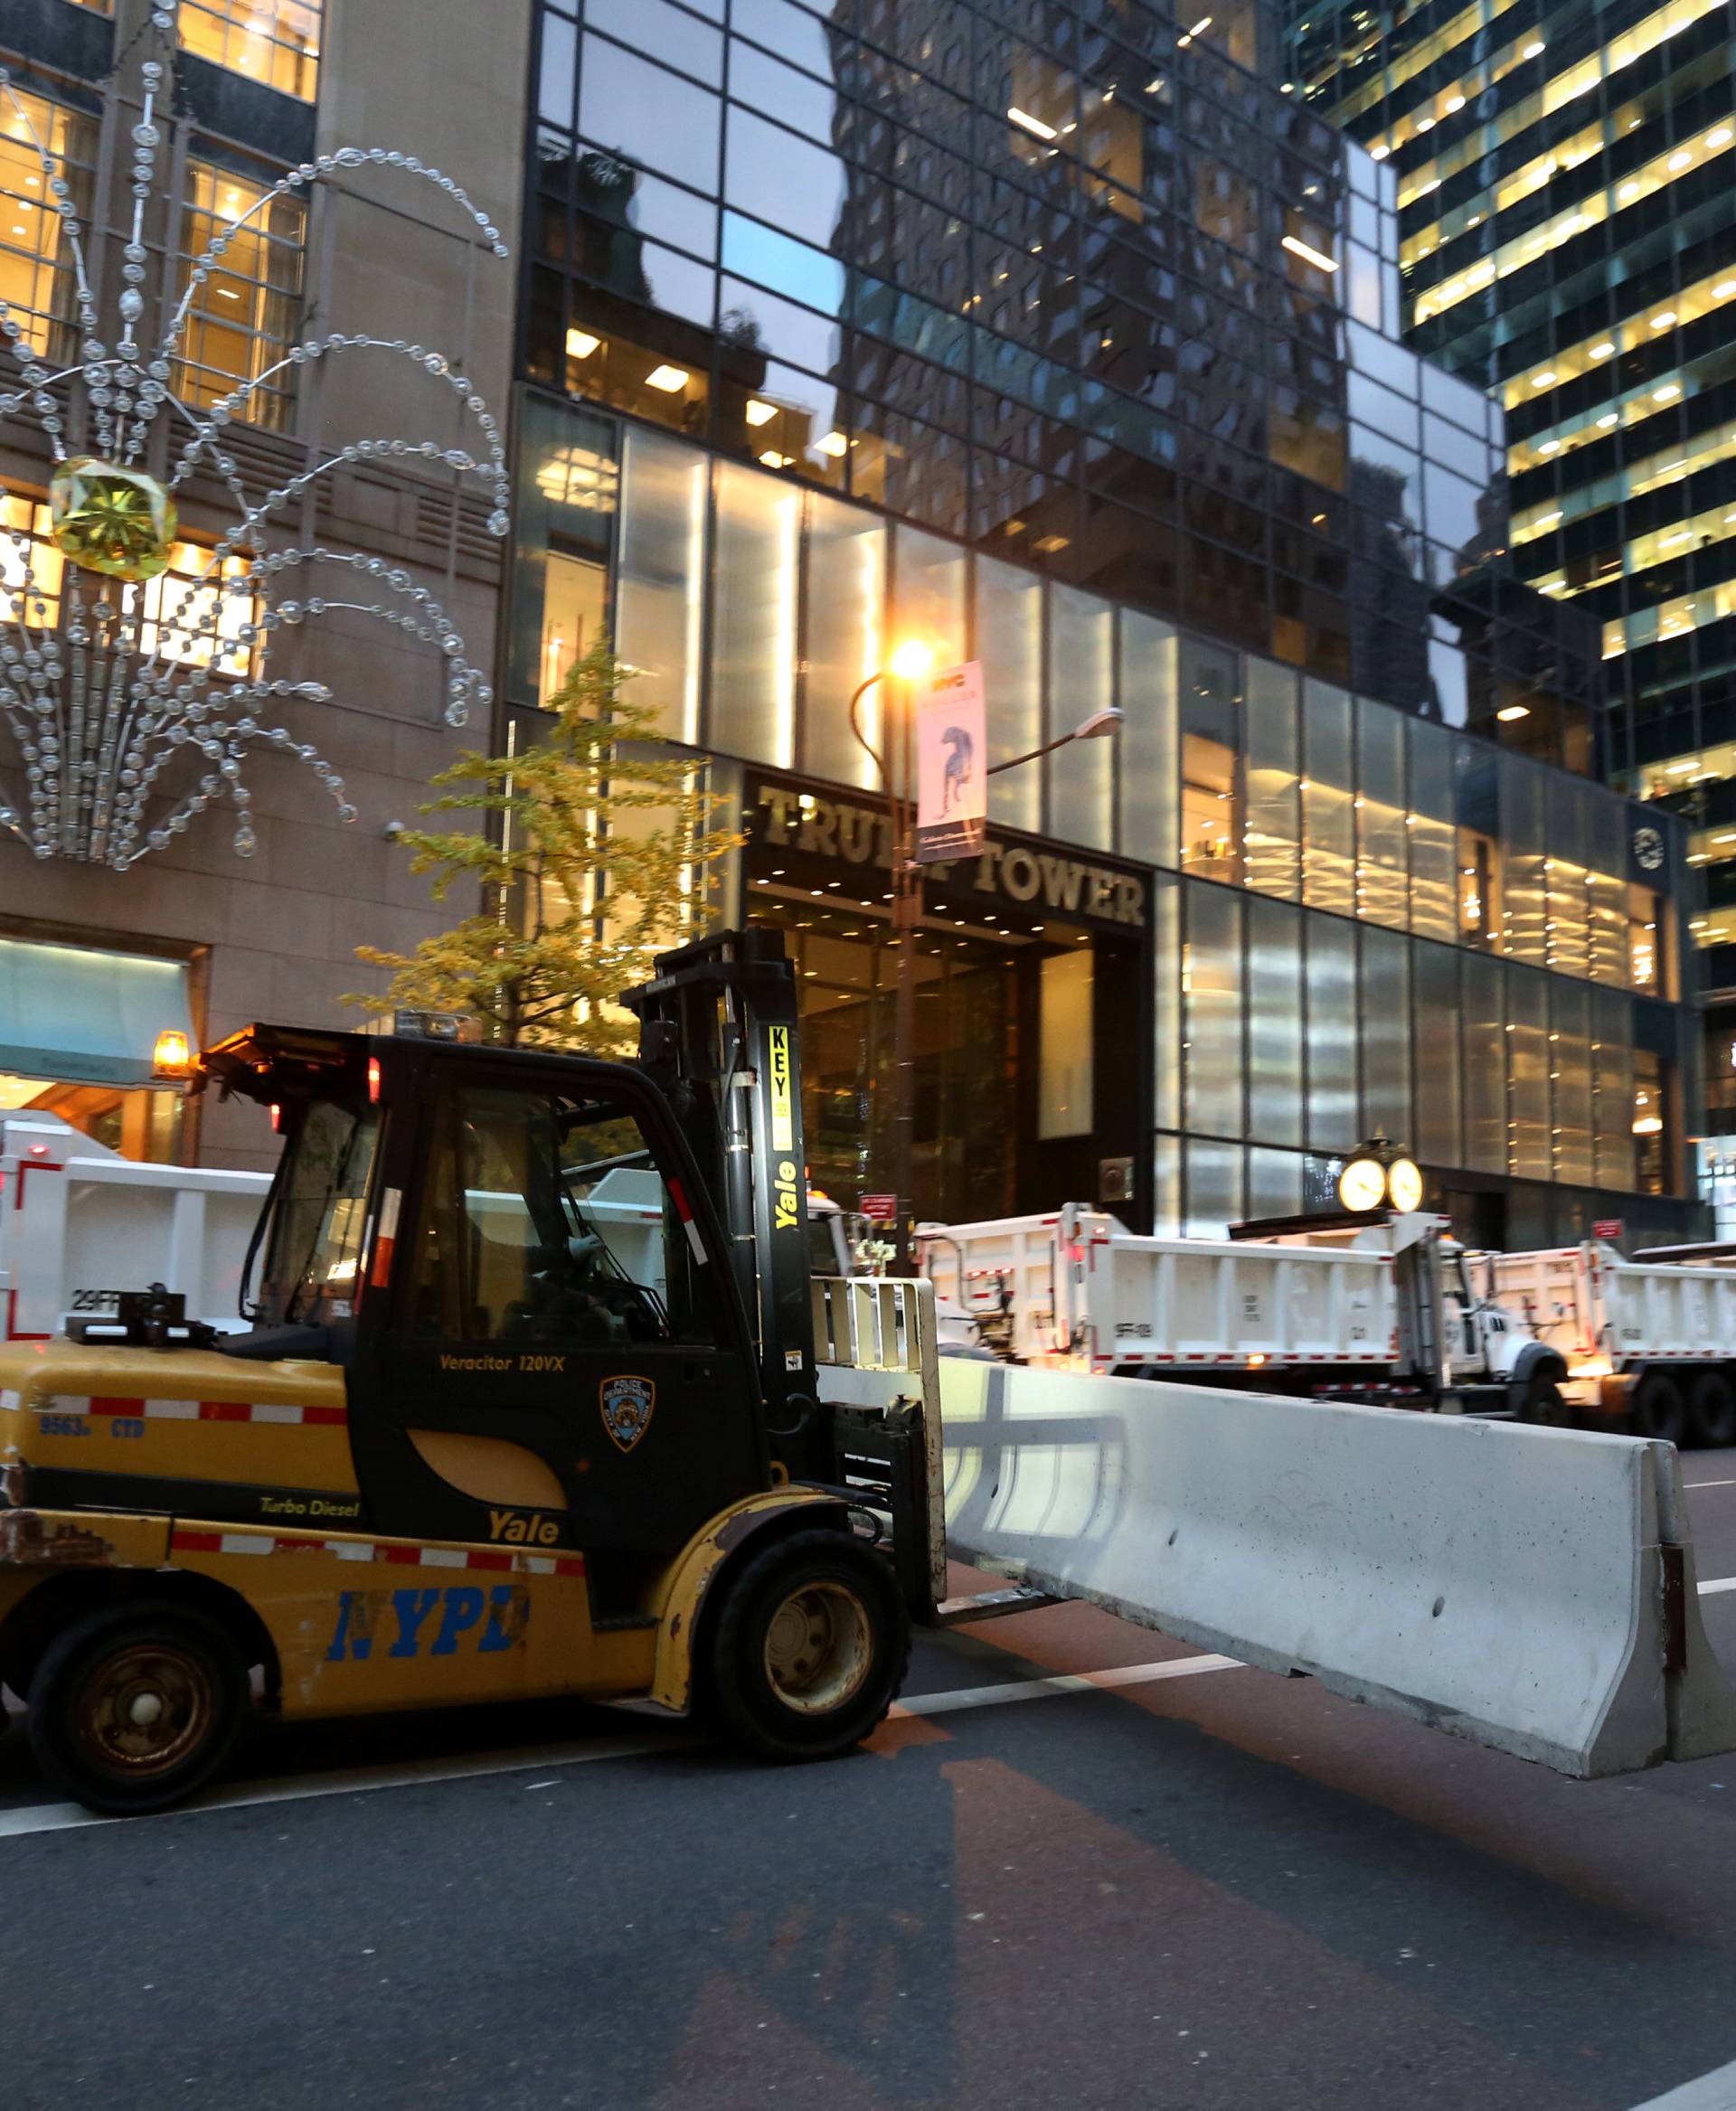 Barricades are brought into position at Trump Tower after the election selected Republican president-elect Donald Trump in New York